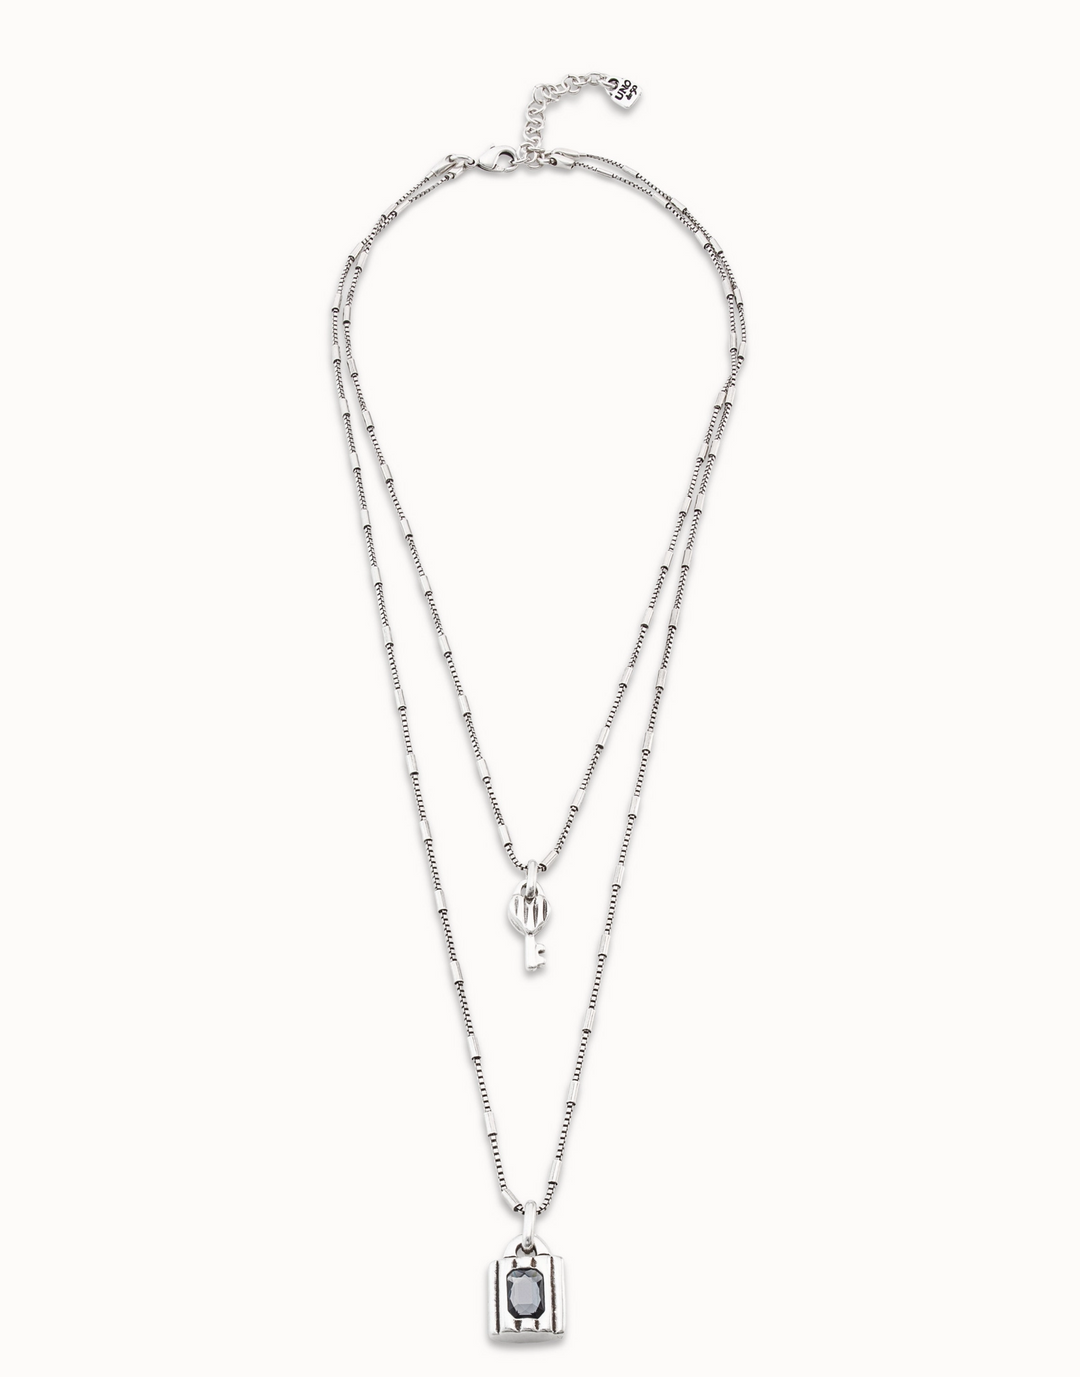 LOCK LAYERED NECKLACE SILVER - Kingfisher Road - Online Boutique